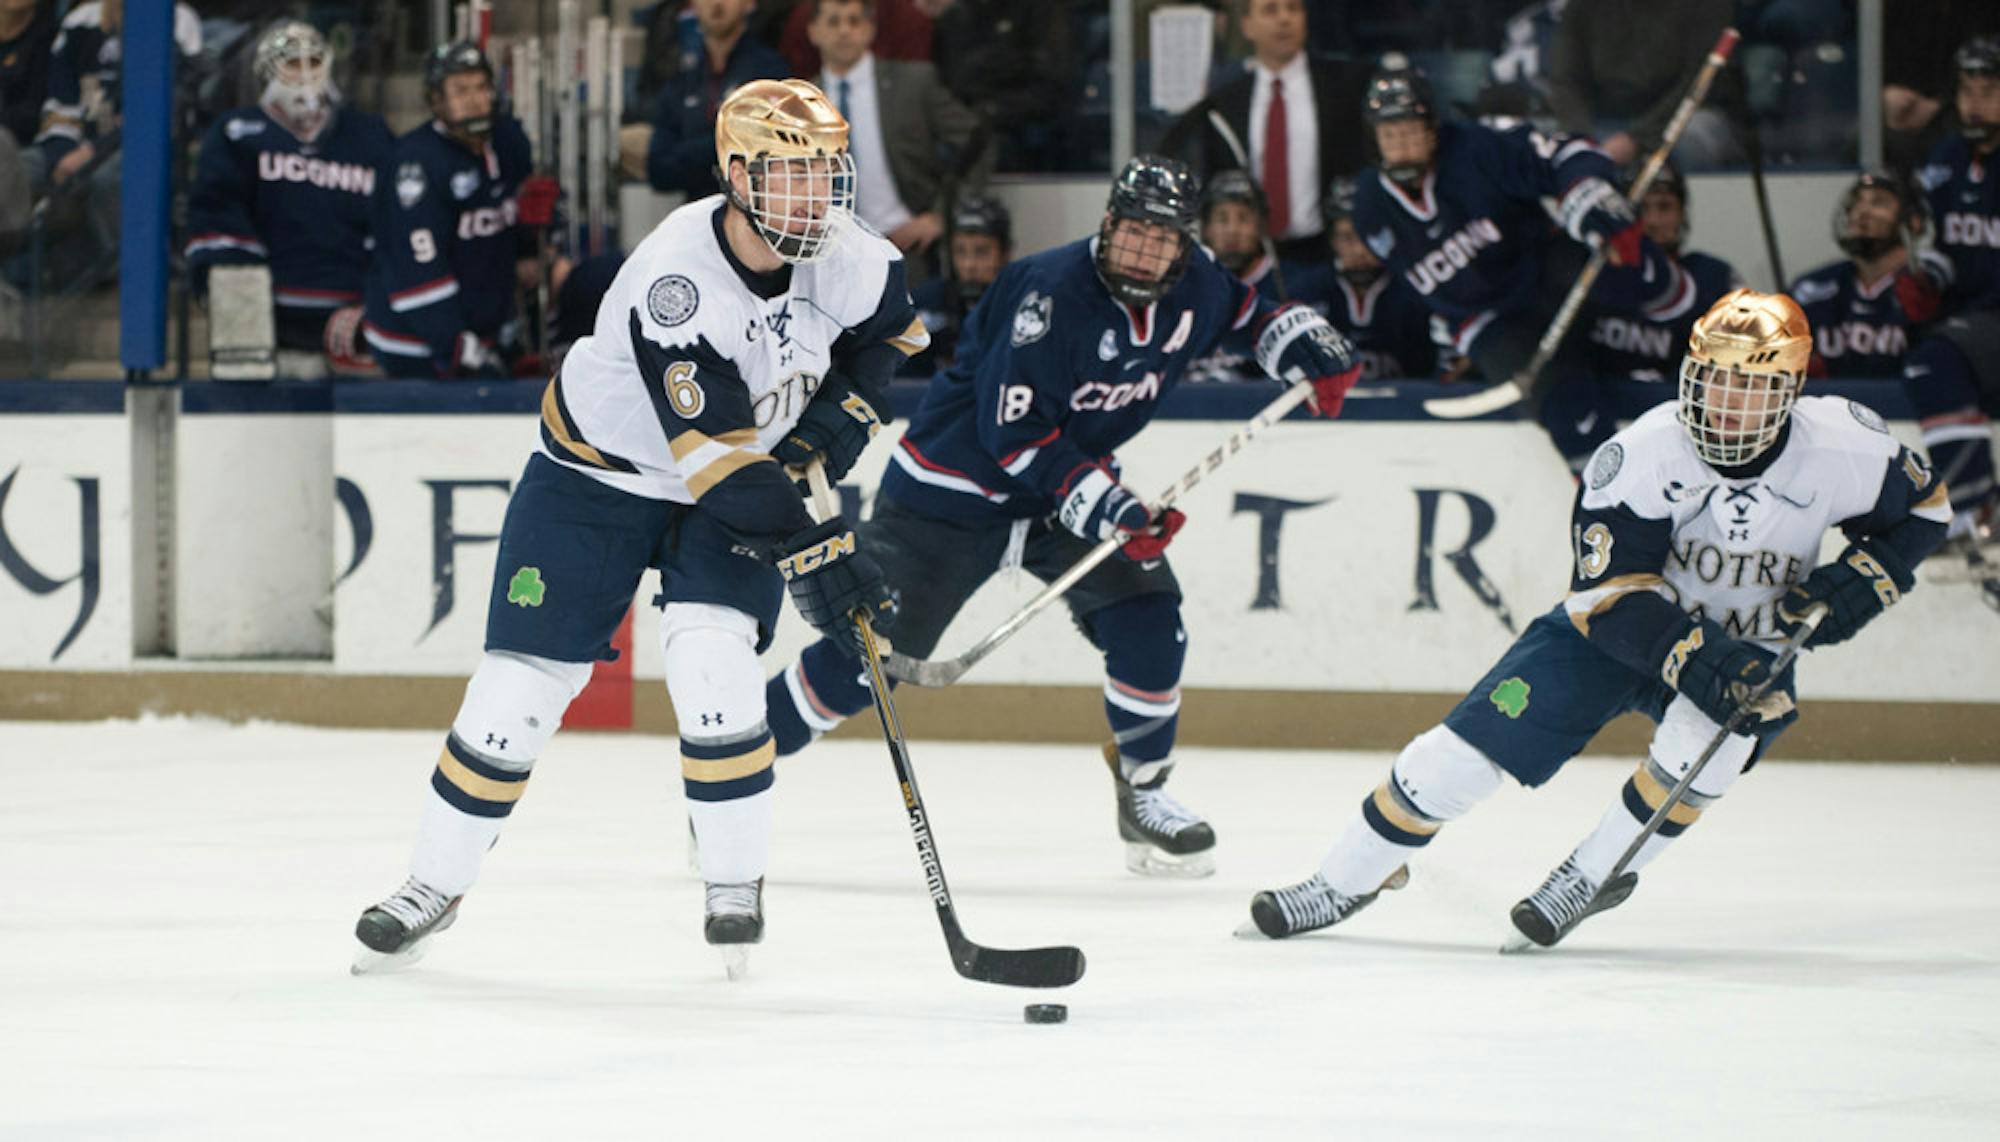 Irish junior defenseman Andy Ryan (left) pushes the puck up the ice in Notre Dame’s 3-3 tie with Connecticut on Friday.